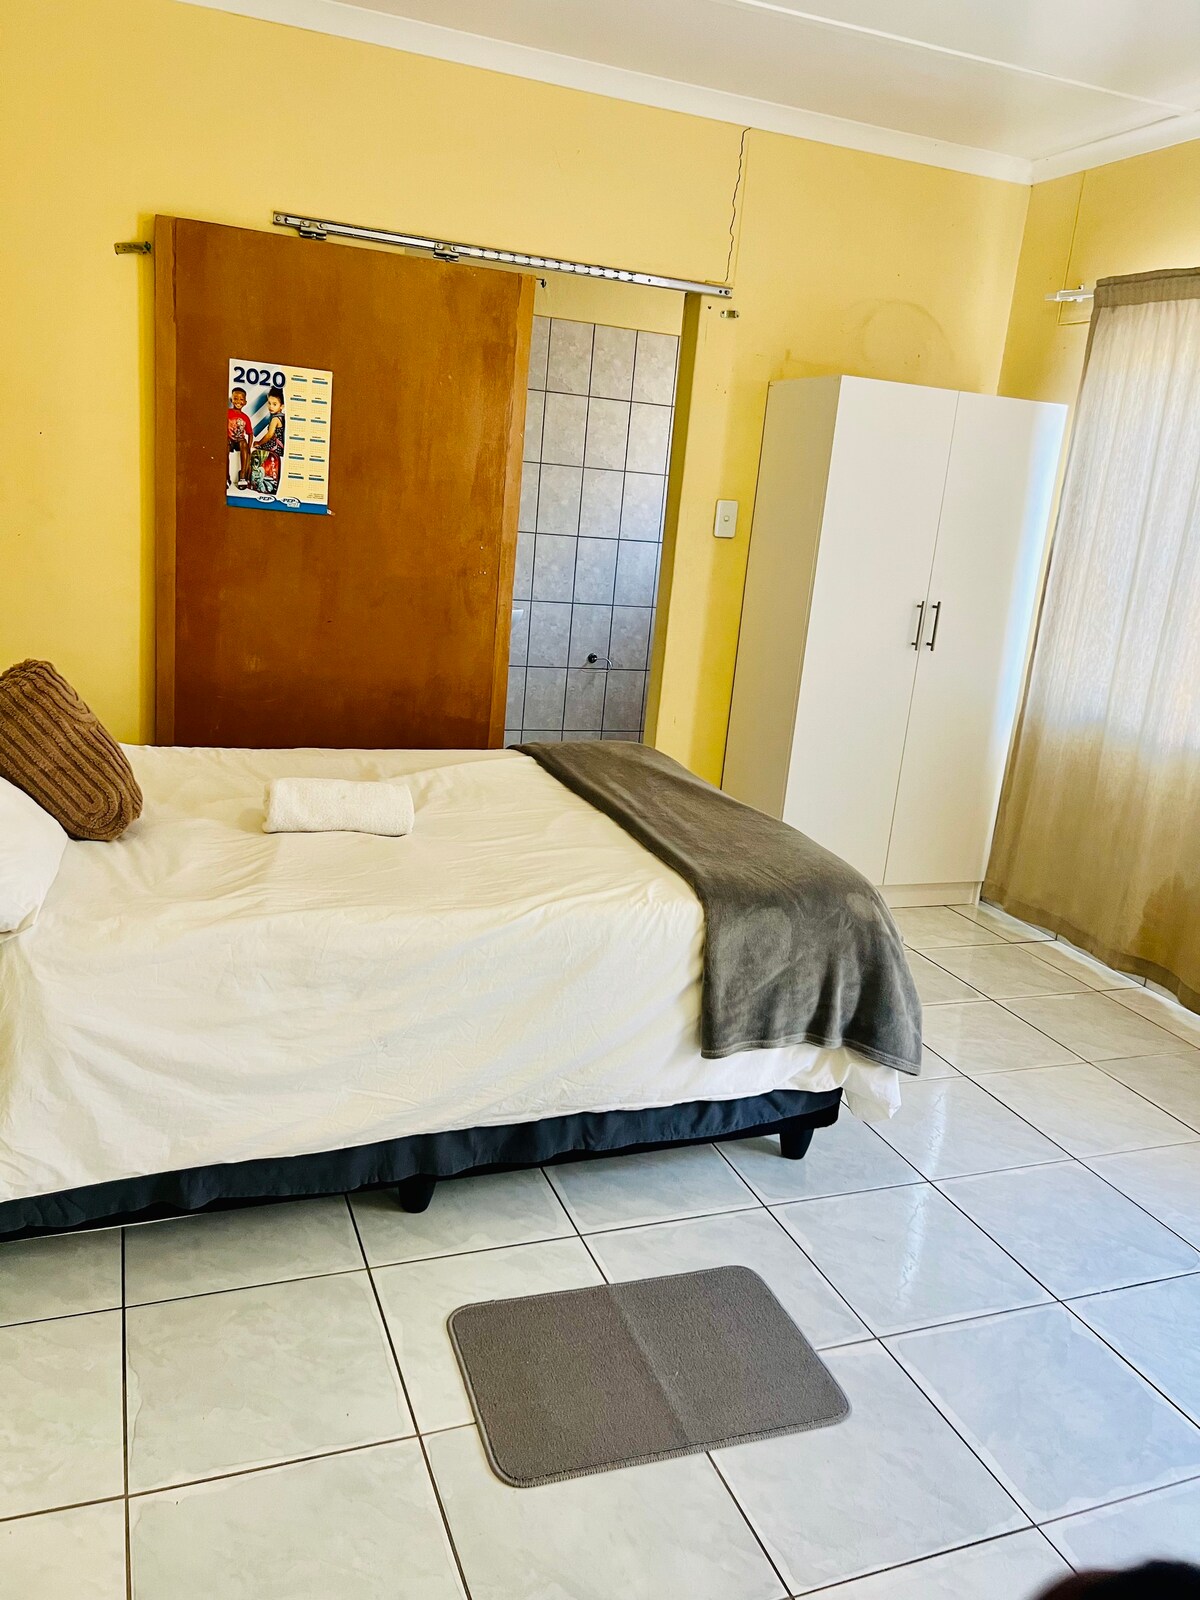 Paddy guest rooms